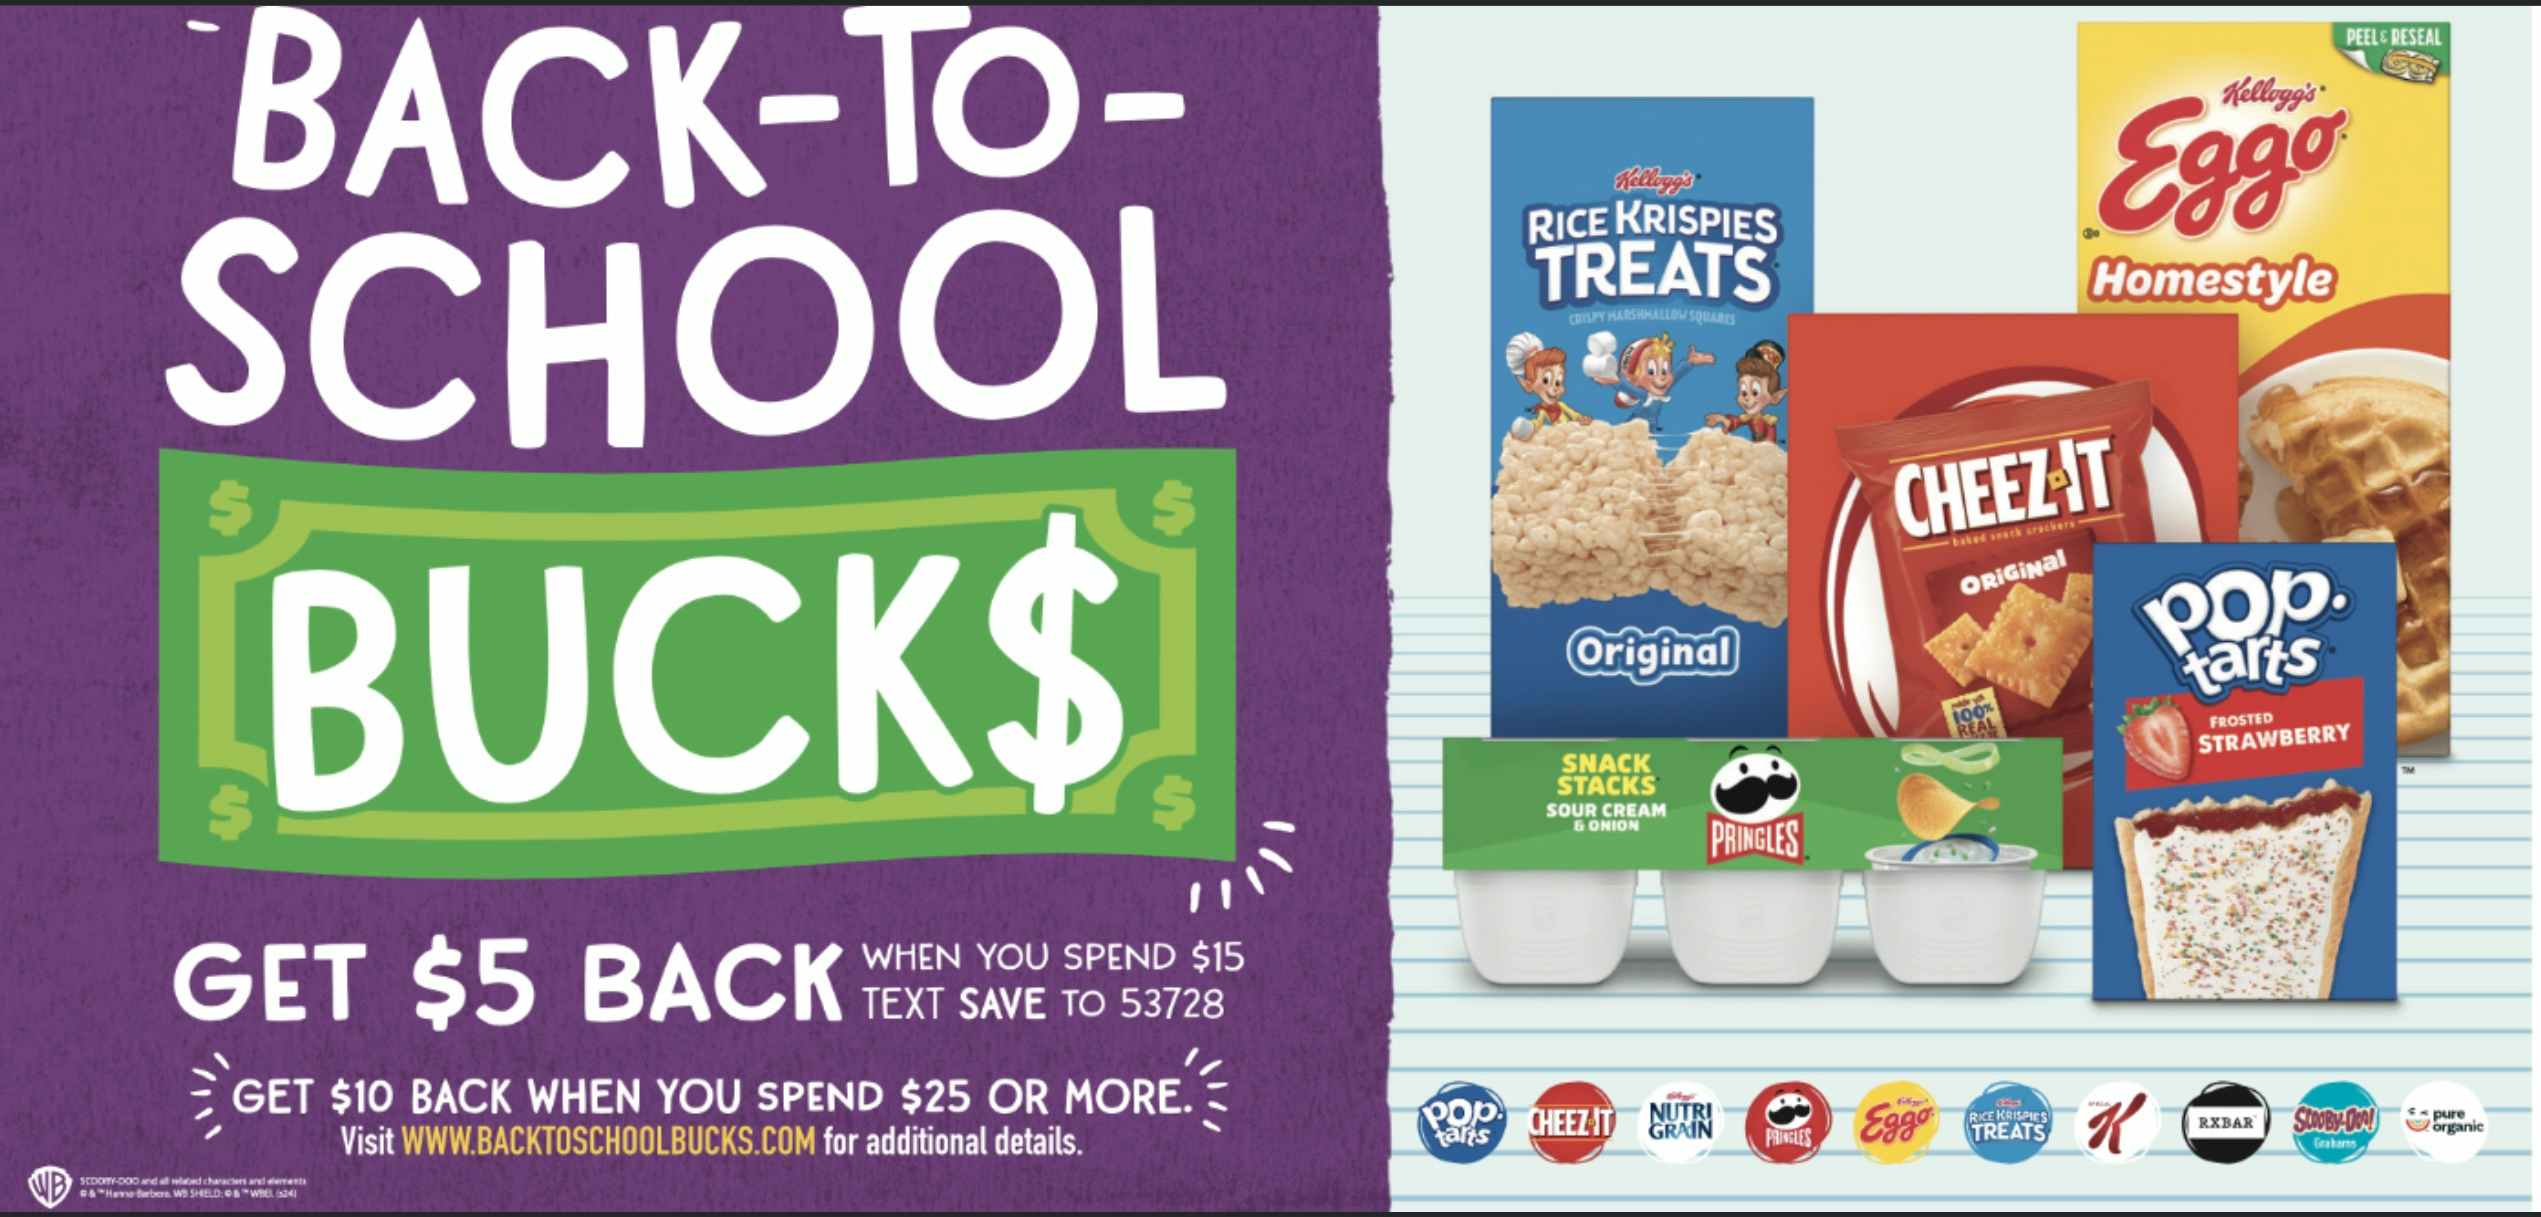 image of rice krispies treats, cheez-its, eggo and more snacks with an image of earning cash back for purchasing